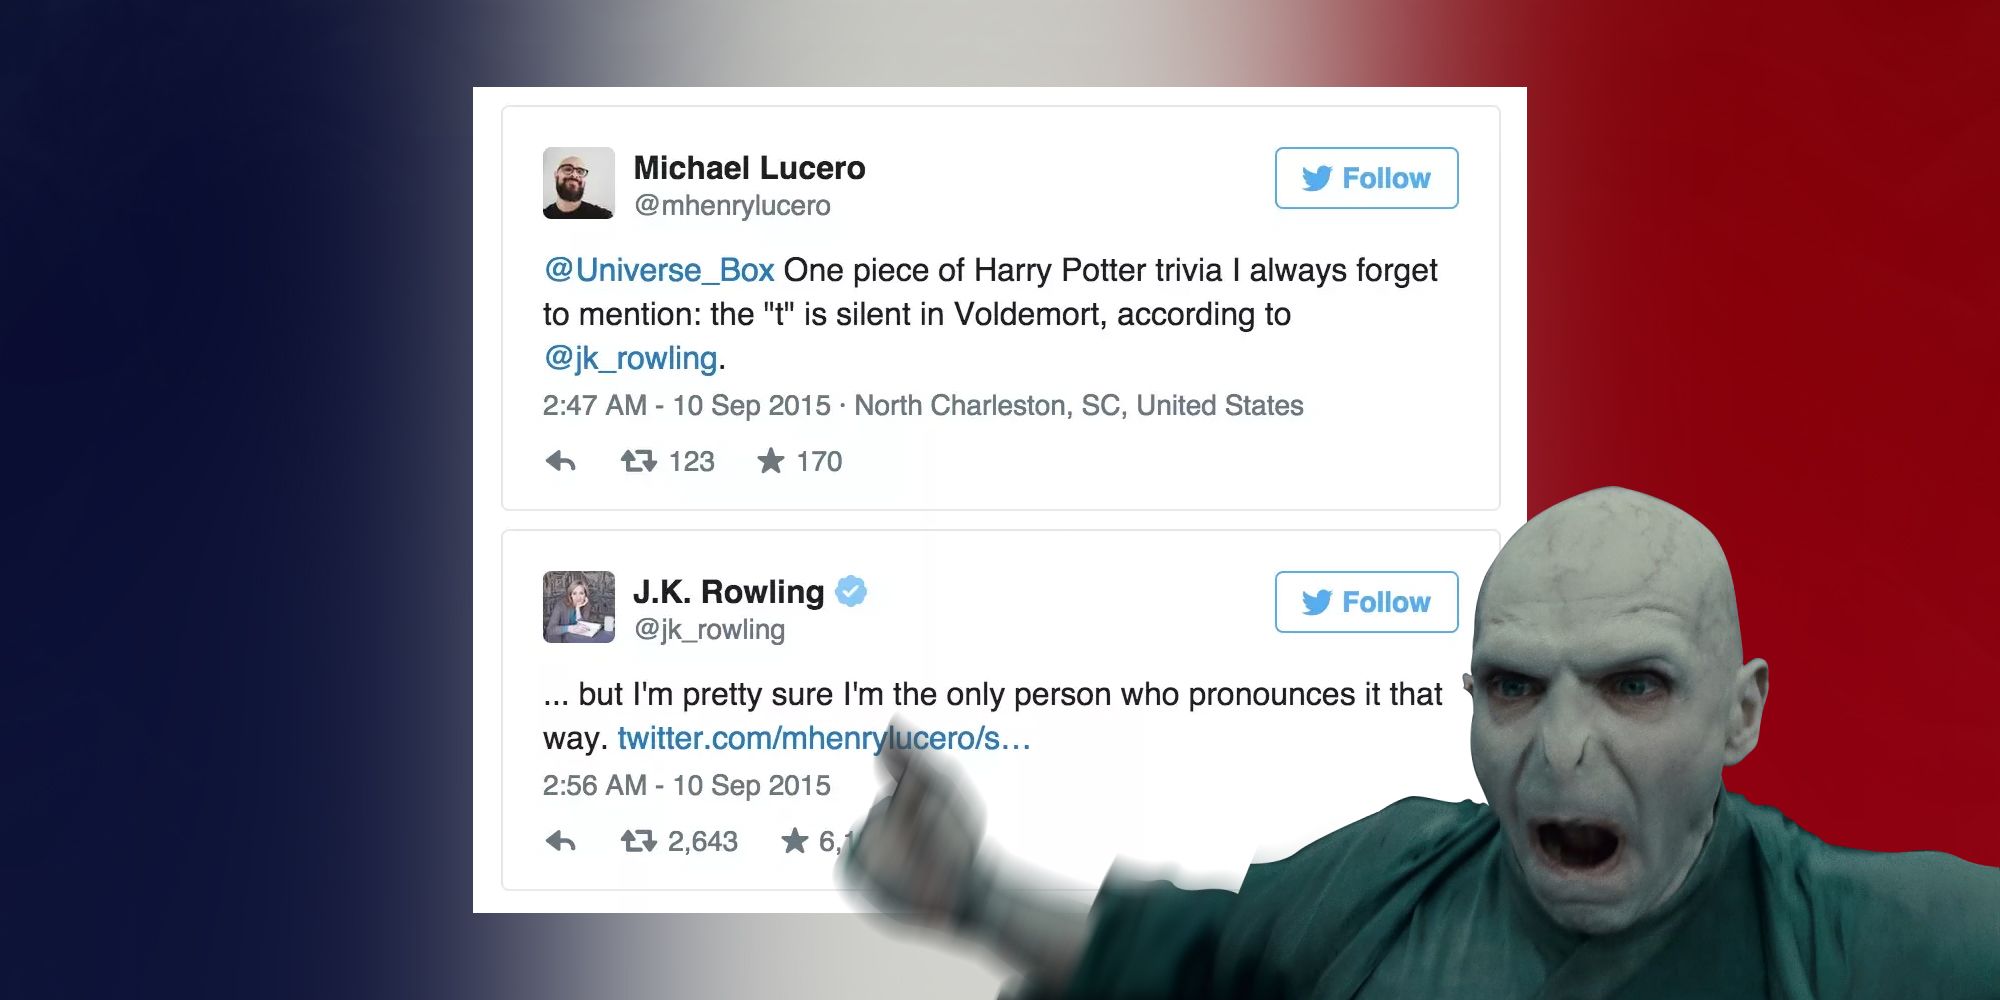 The proper pronunciation of Voldemort's name, according to J.K. Rowling